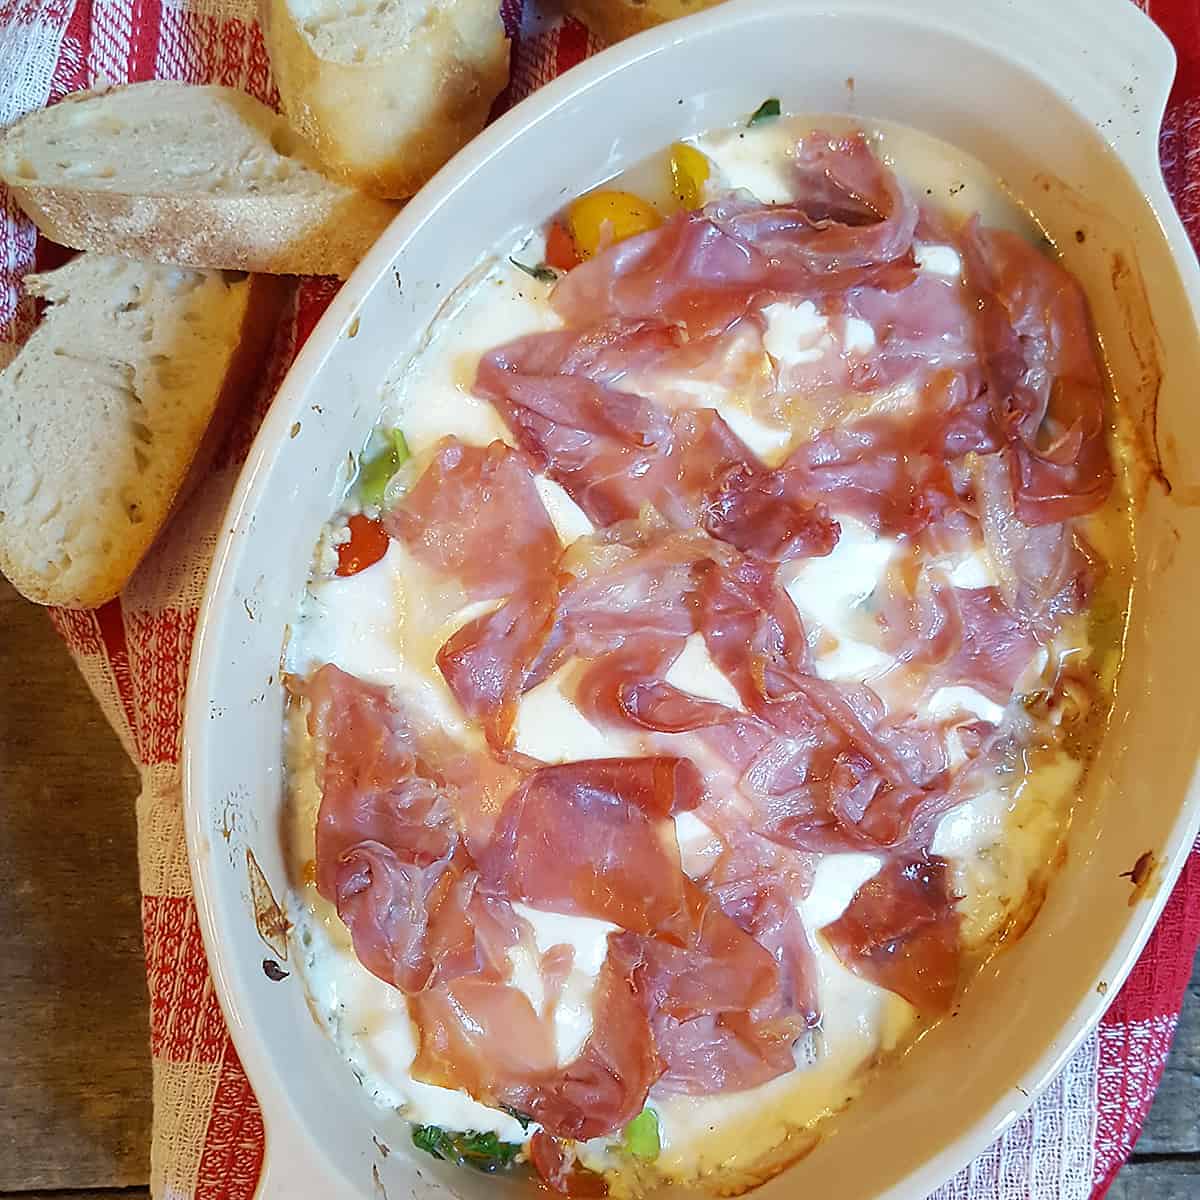 Baked Mozzarella with Prosciutto and Cherry Tomatoes